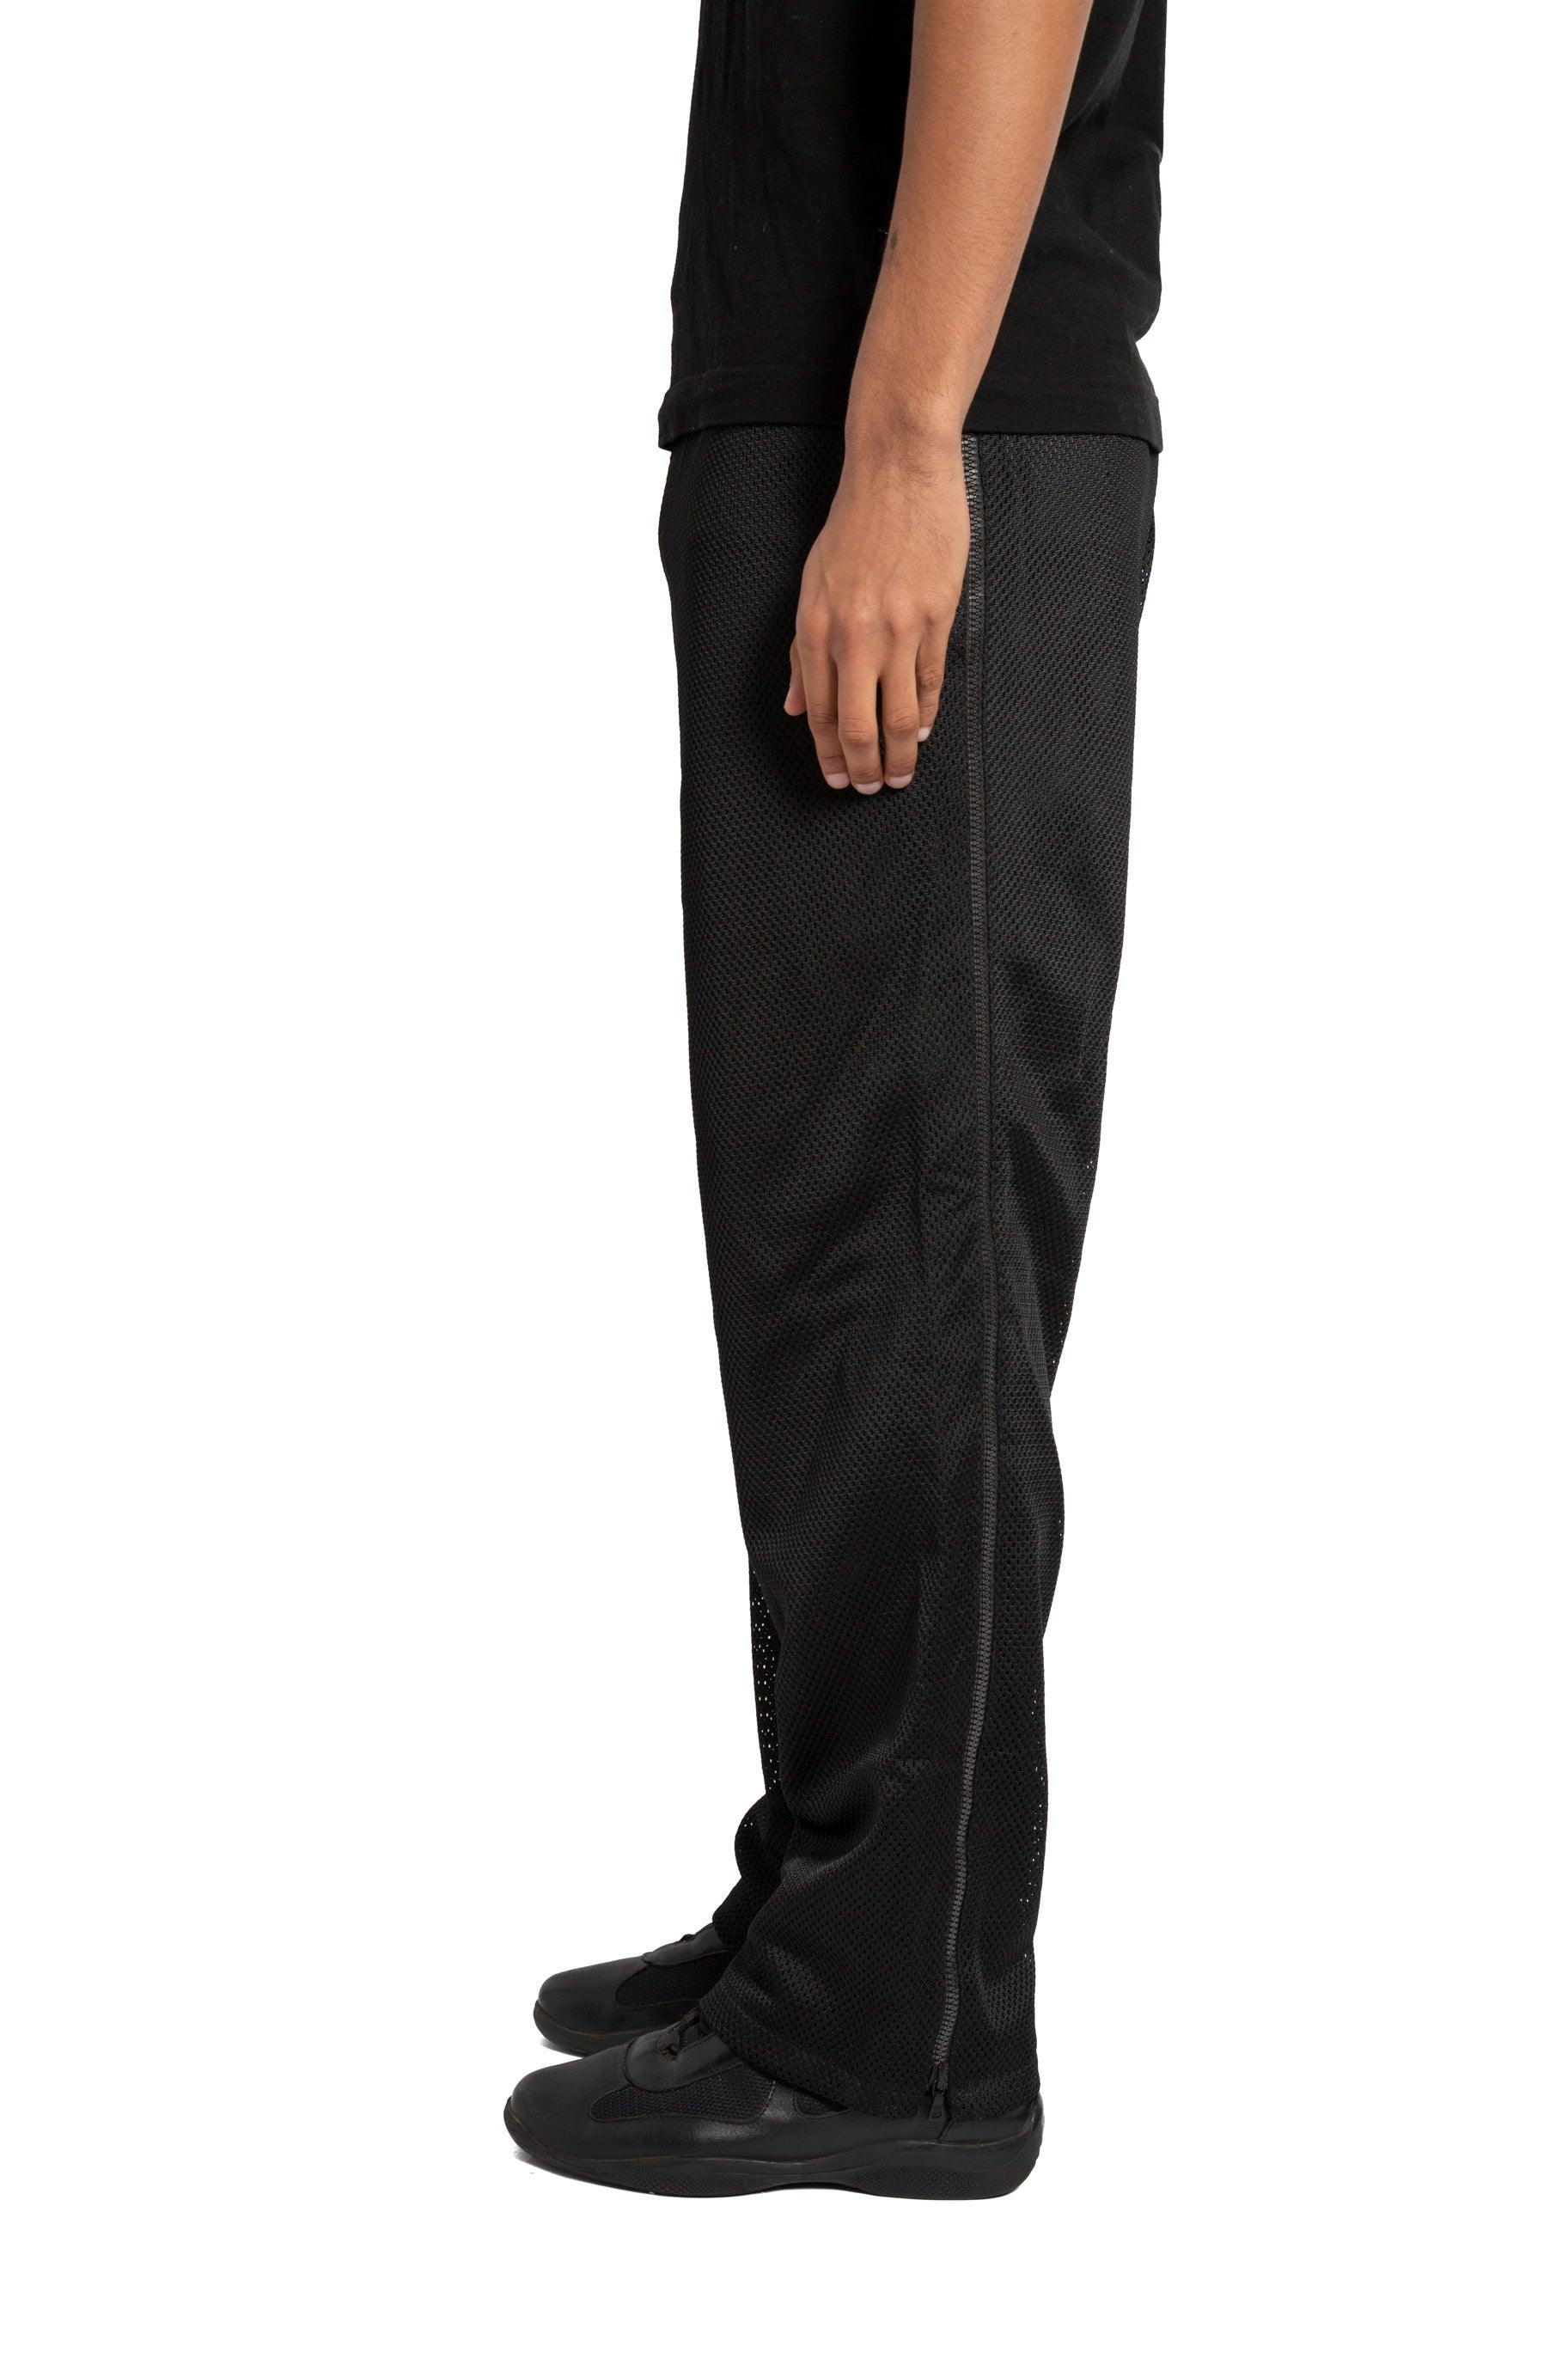 Prada Perforated Tech Blackout Trousers - Known Source